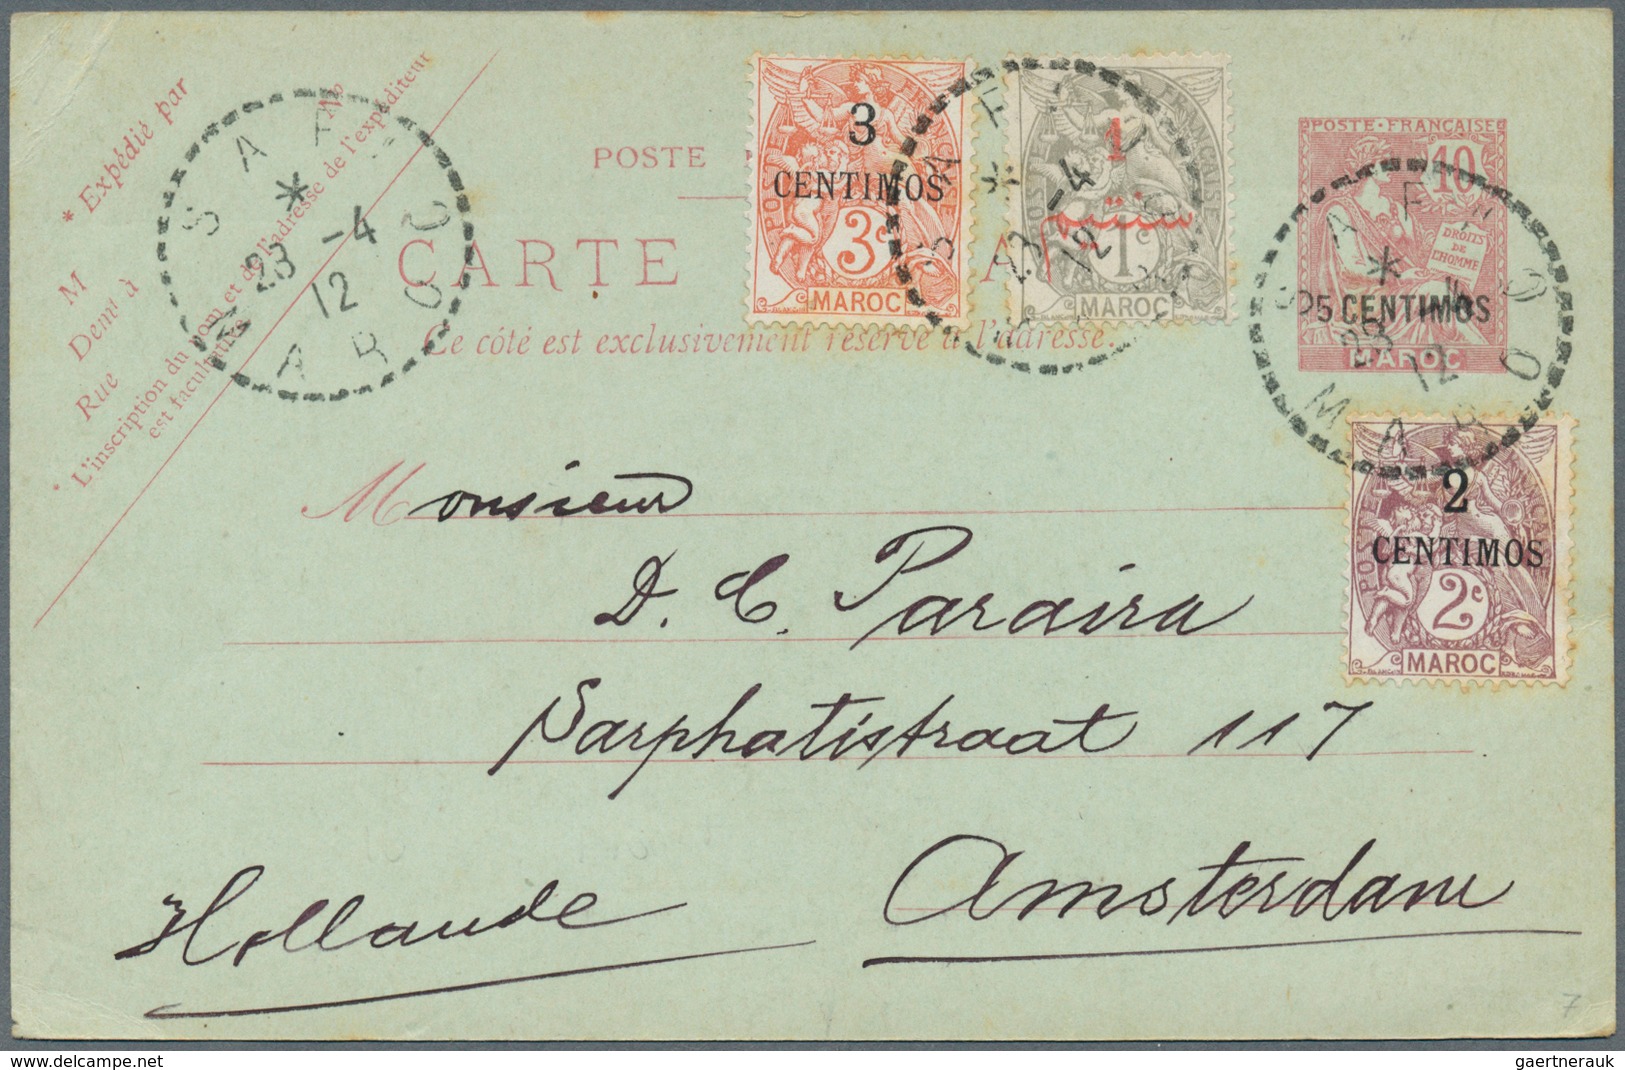 23585 Marokko: 1796 - 1987 nice collection of 112 covers, Postal stationery's and PPC's with good franking